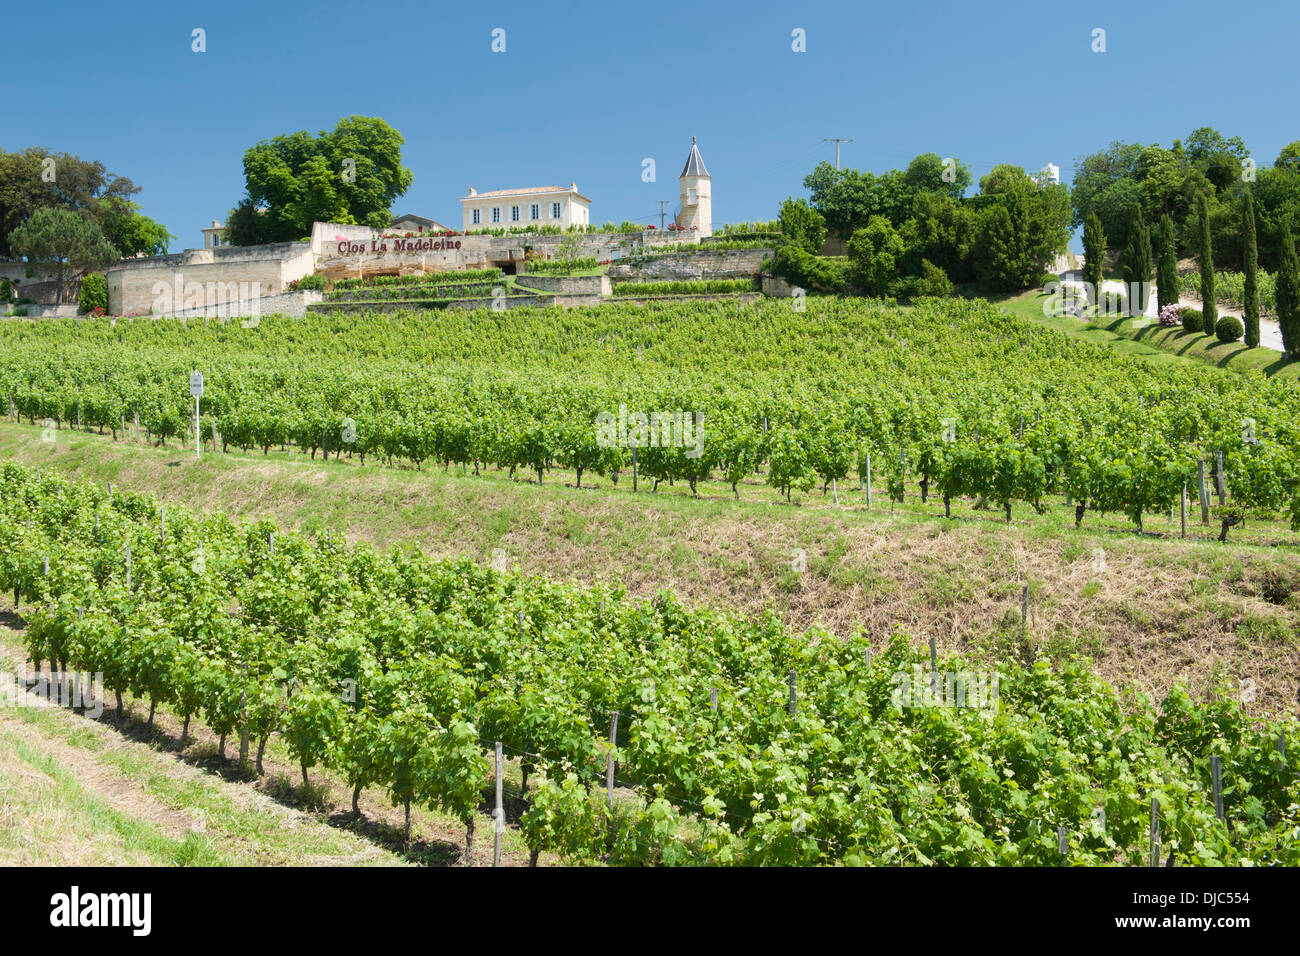 Clos la Madeleine winery and vineyards in Saint-Émilion in the Gironde department in Aquitaine, France. Stock Photo